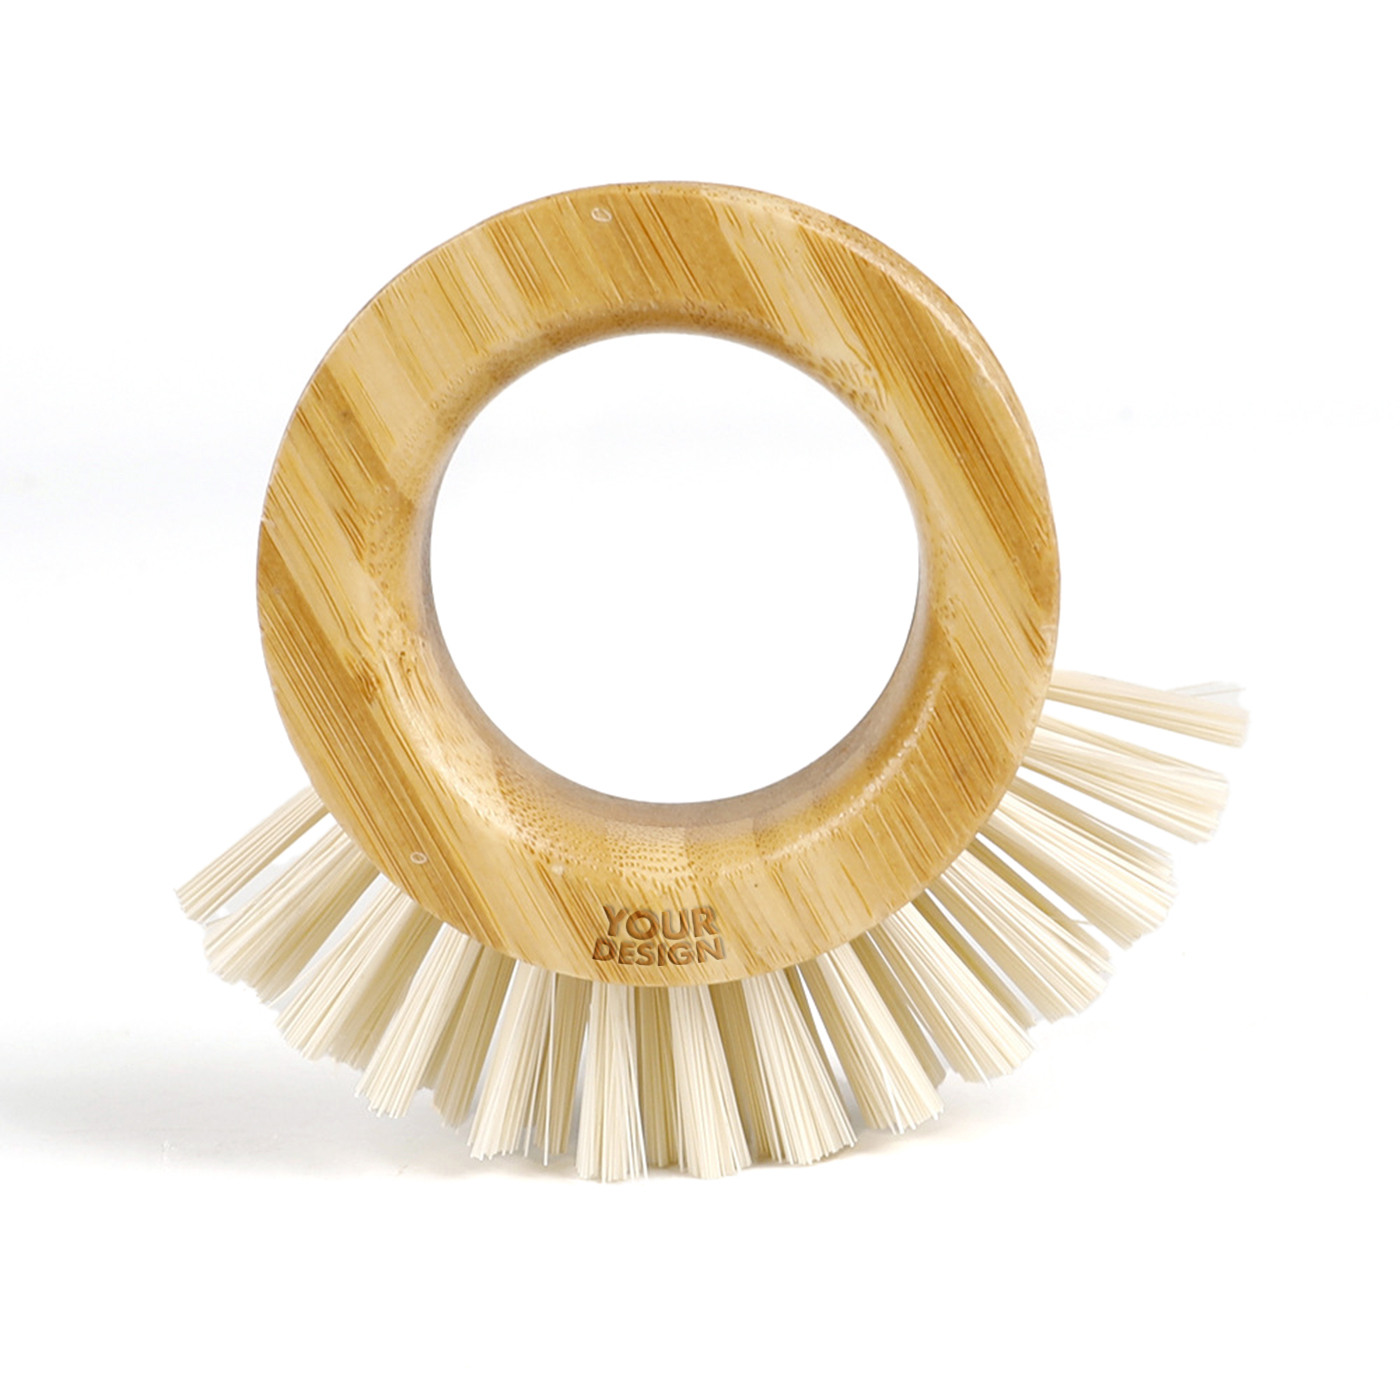 Bamboo Ring Vegetable Scrubber